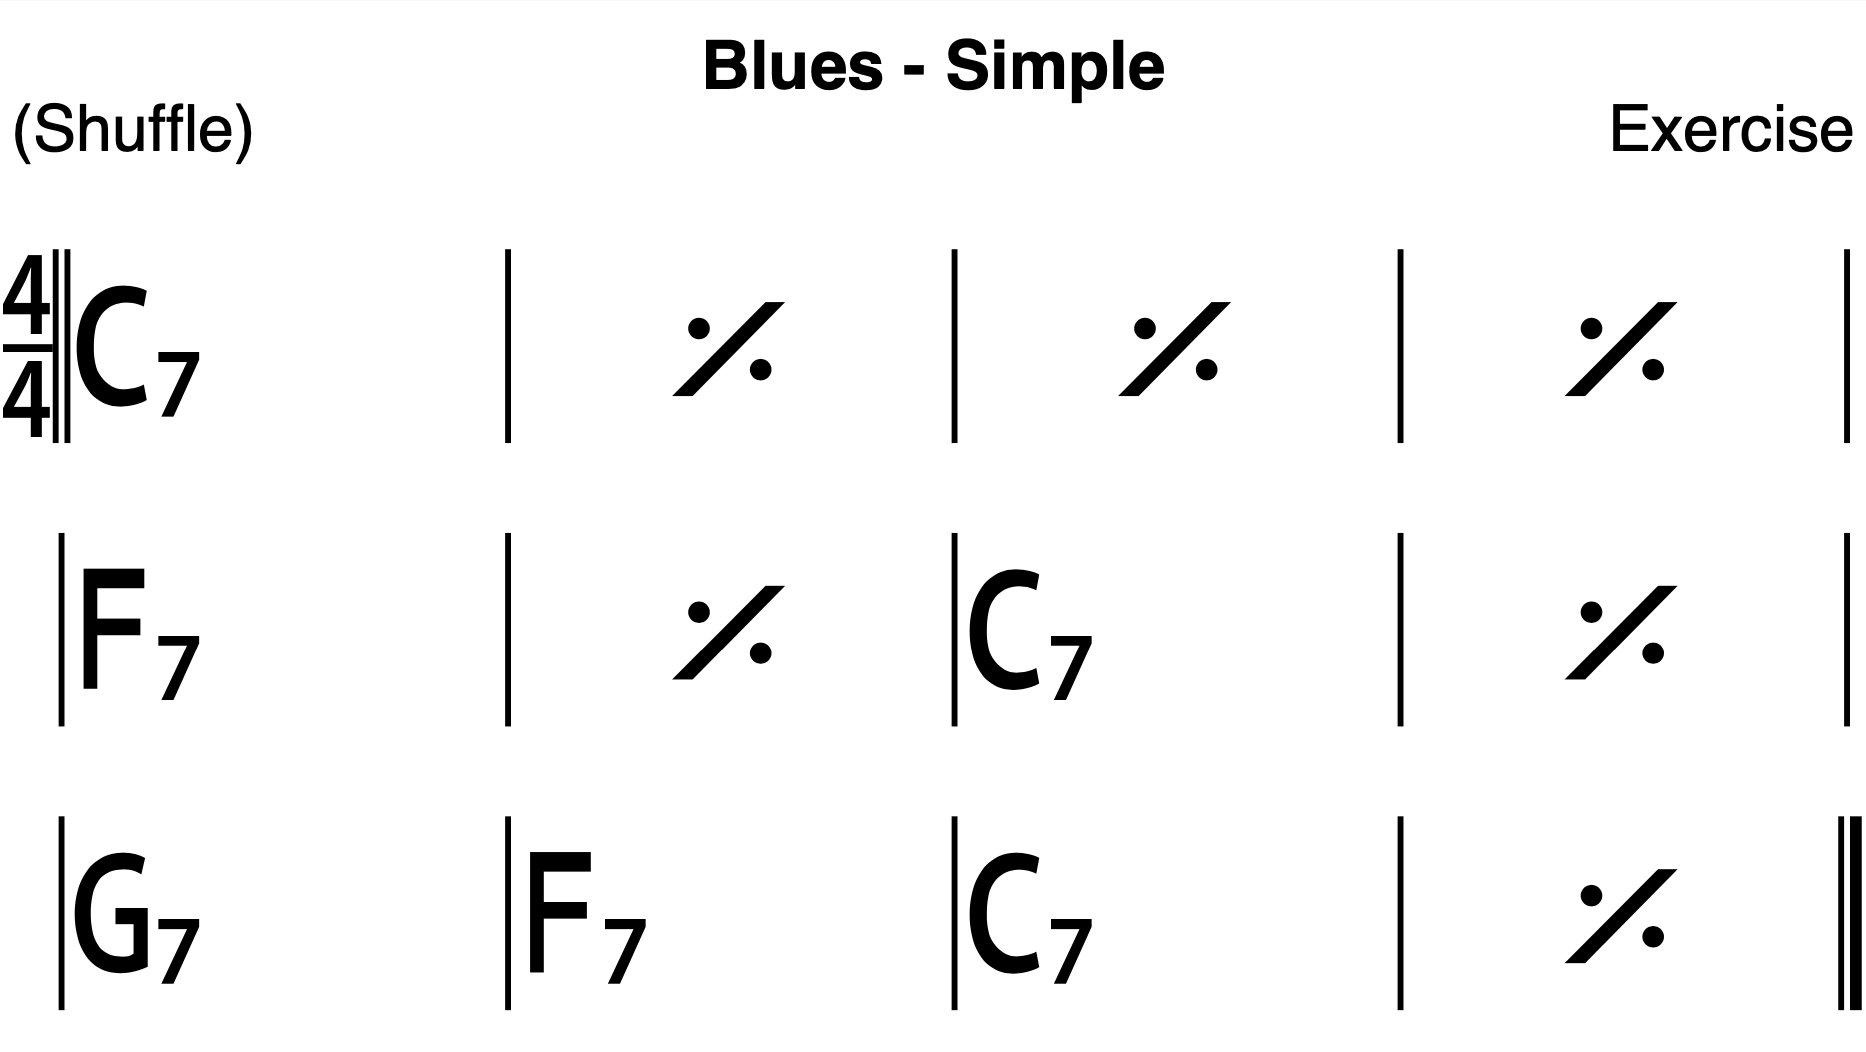 Blues Styles: Traditional/Simple Blues